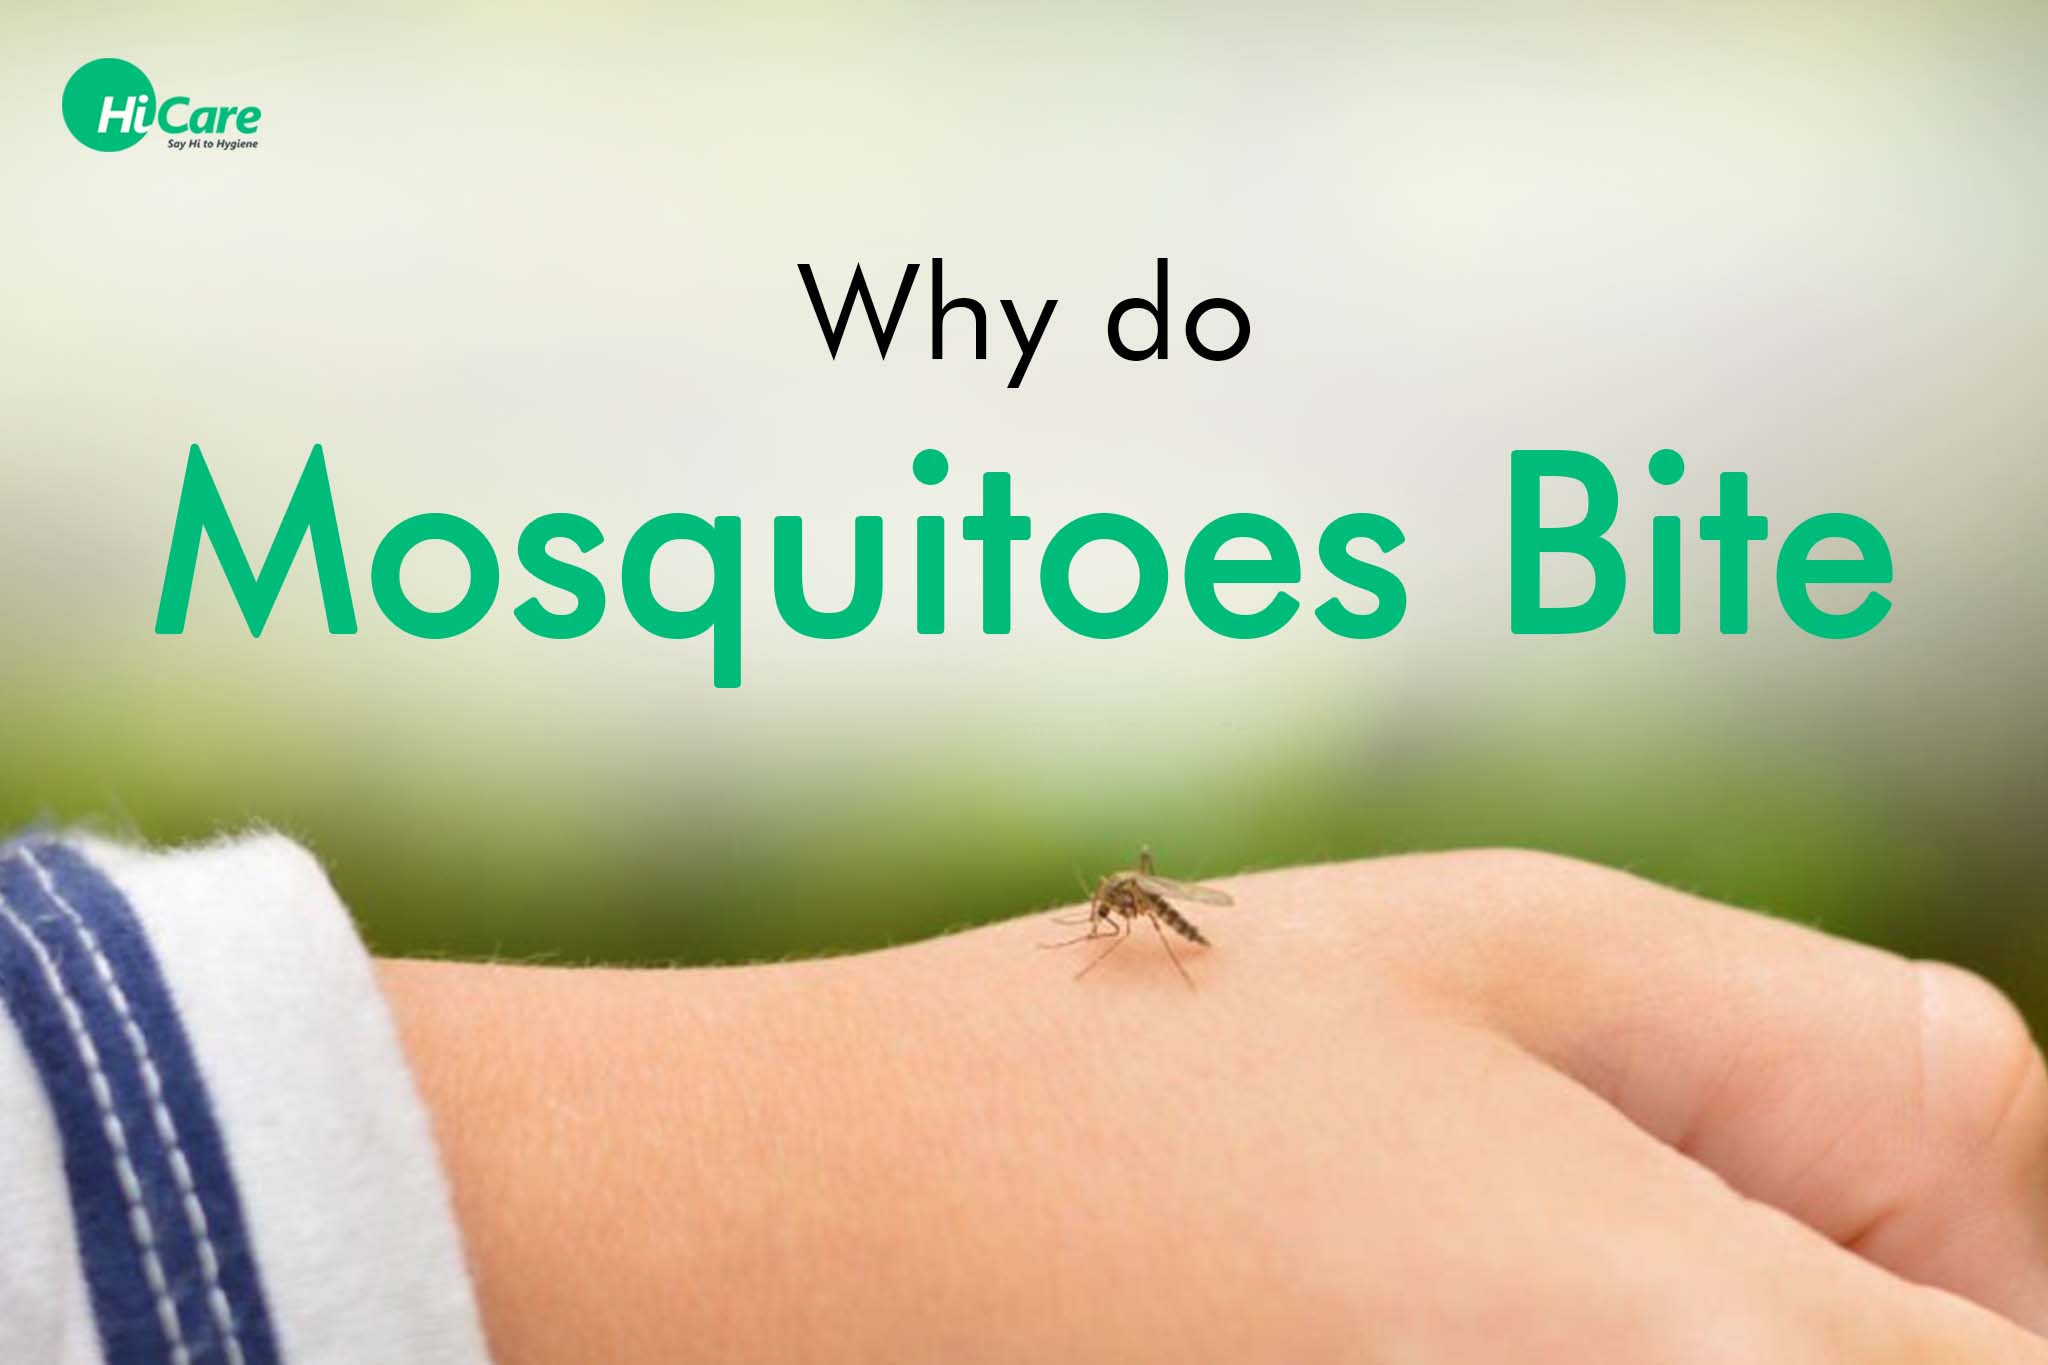 Why do mosquitoes bite?